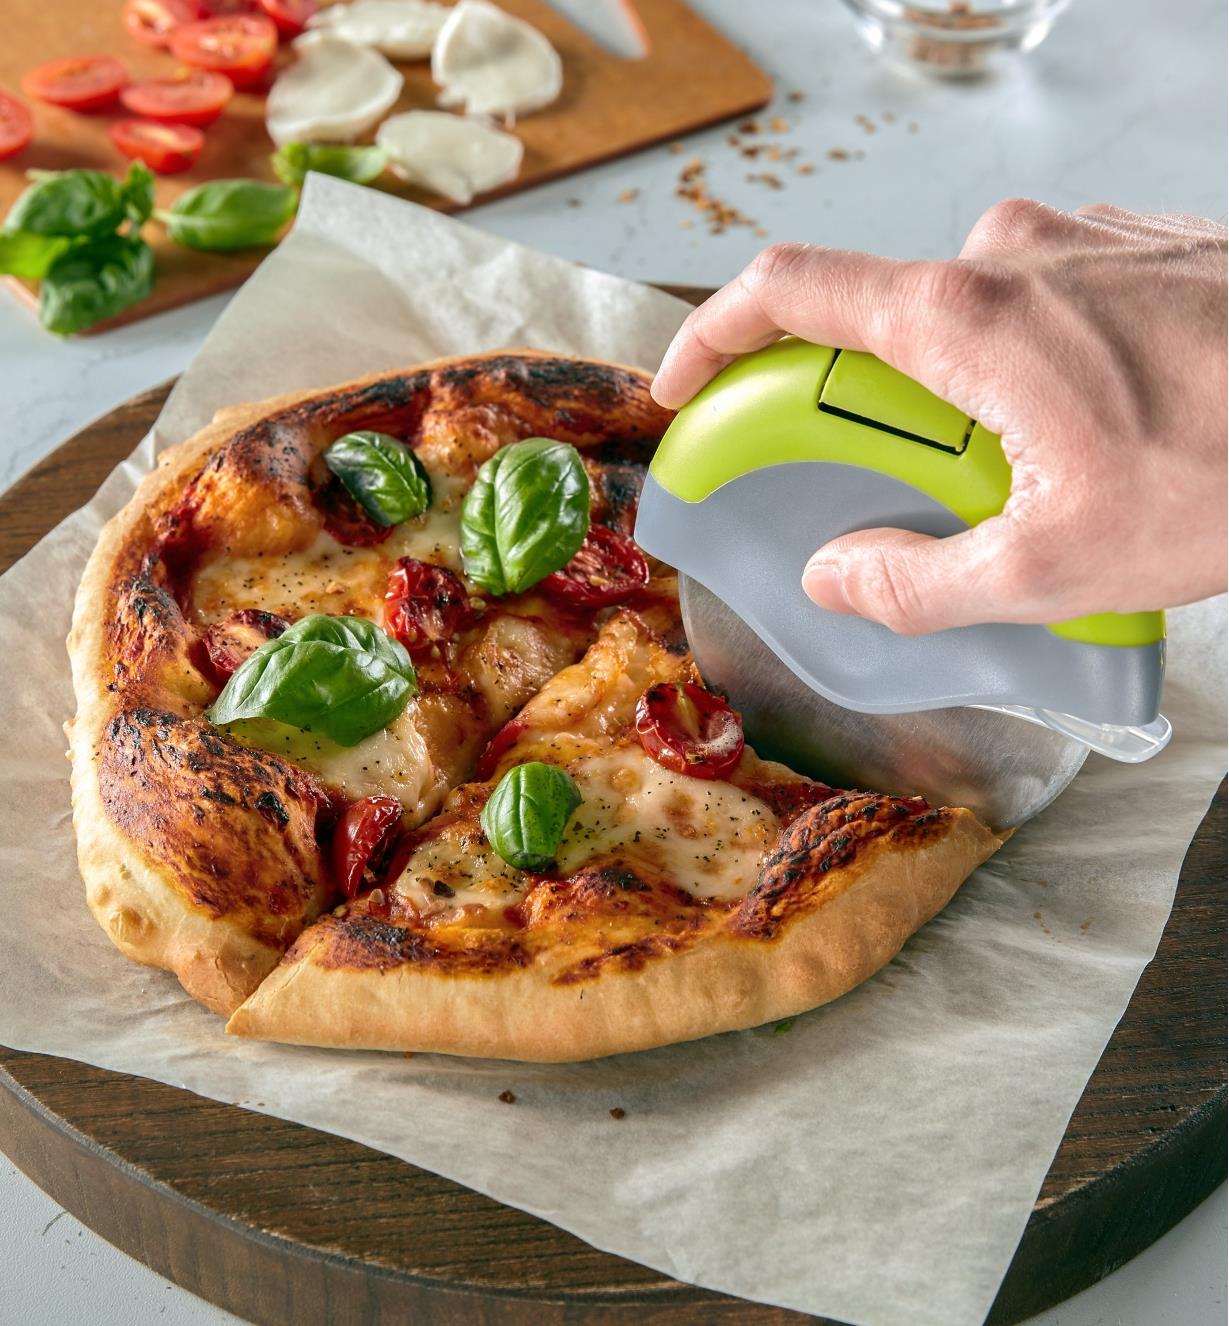 Pizza cutter slicing a cooked pizza